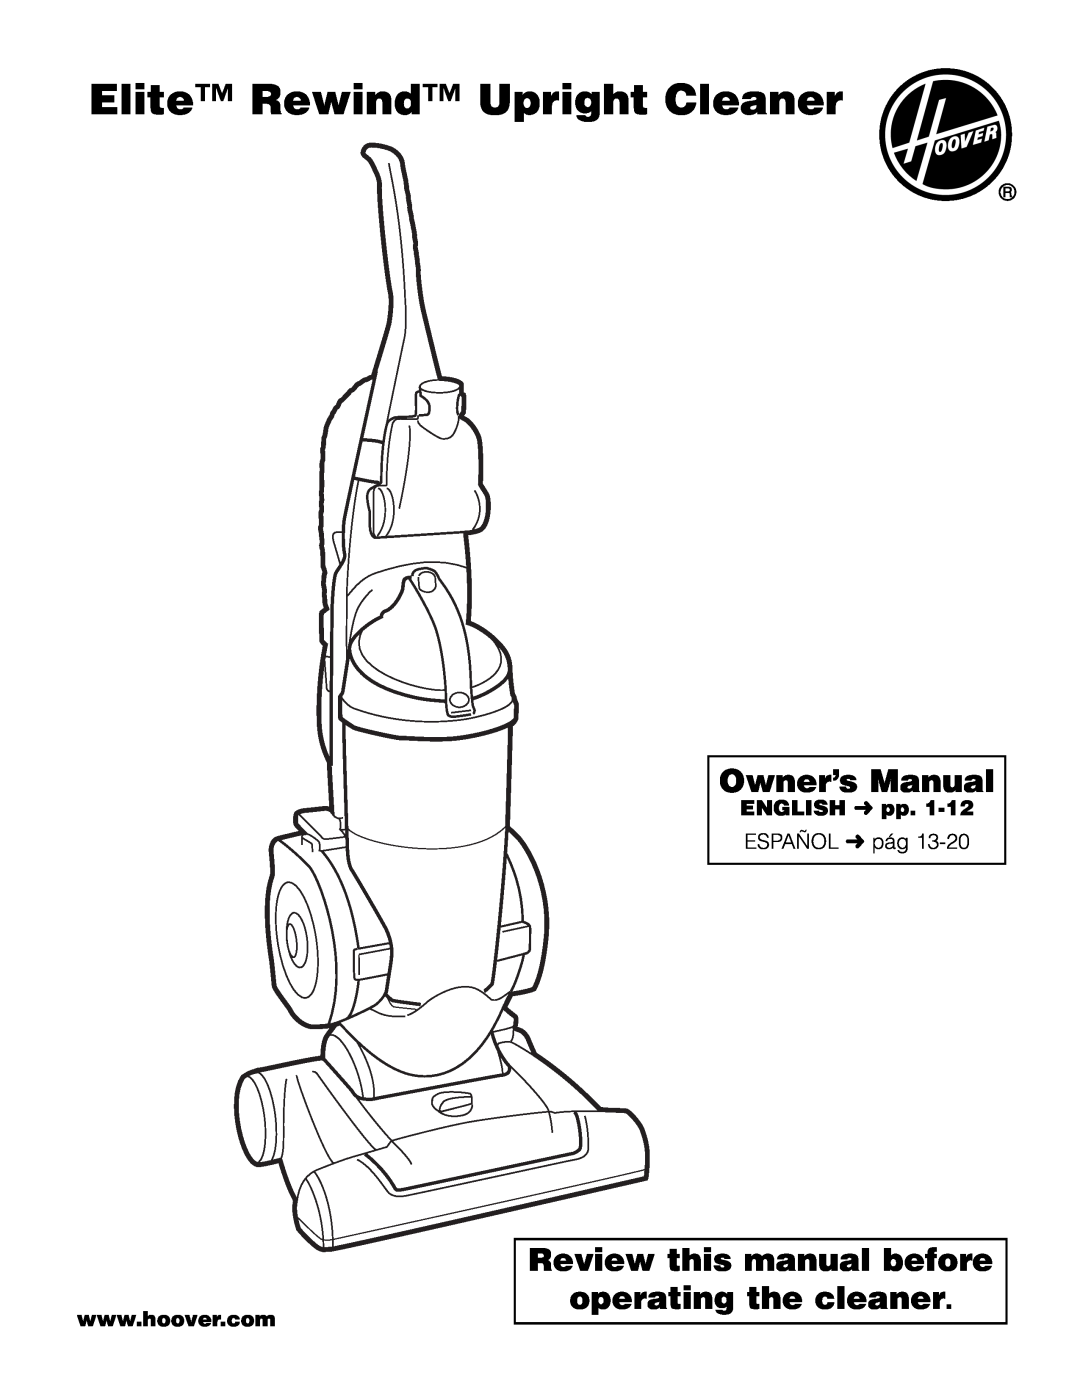 Hoover Elite Rewind Upright Cleaner owner manual Owner’s Manual, Review this manual before operating the cleaner 